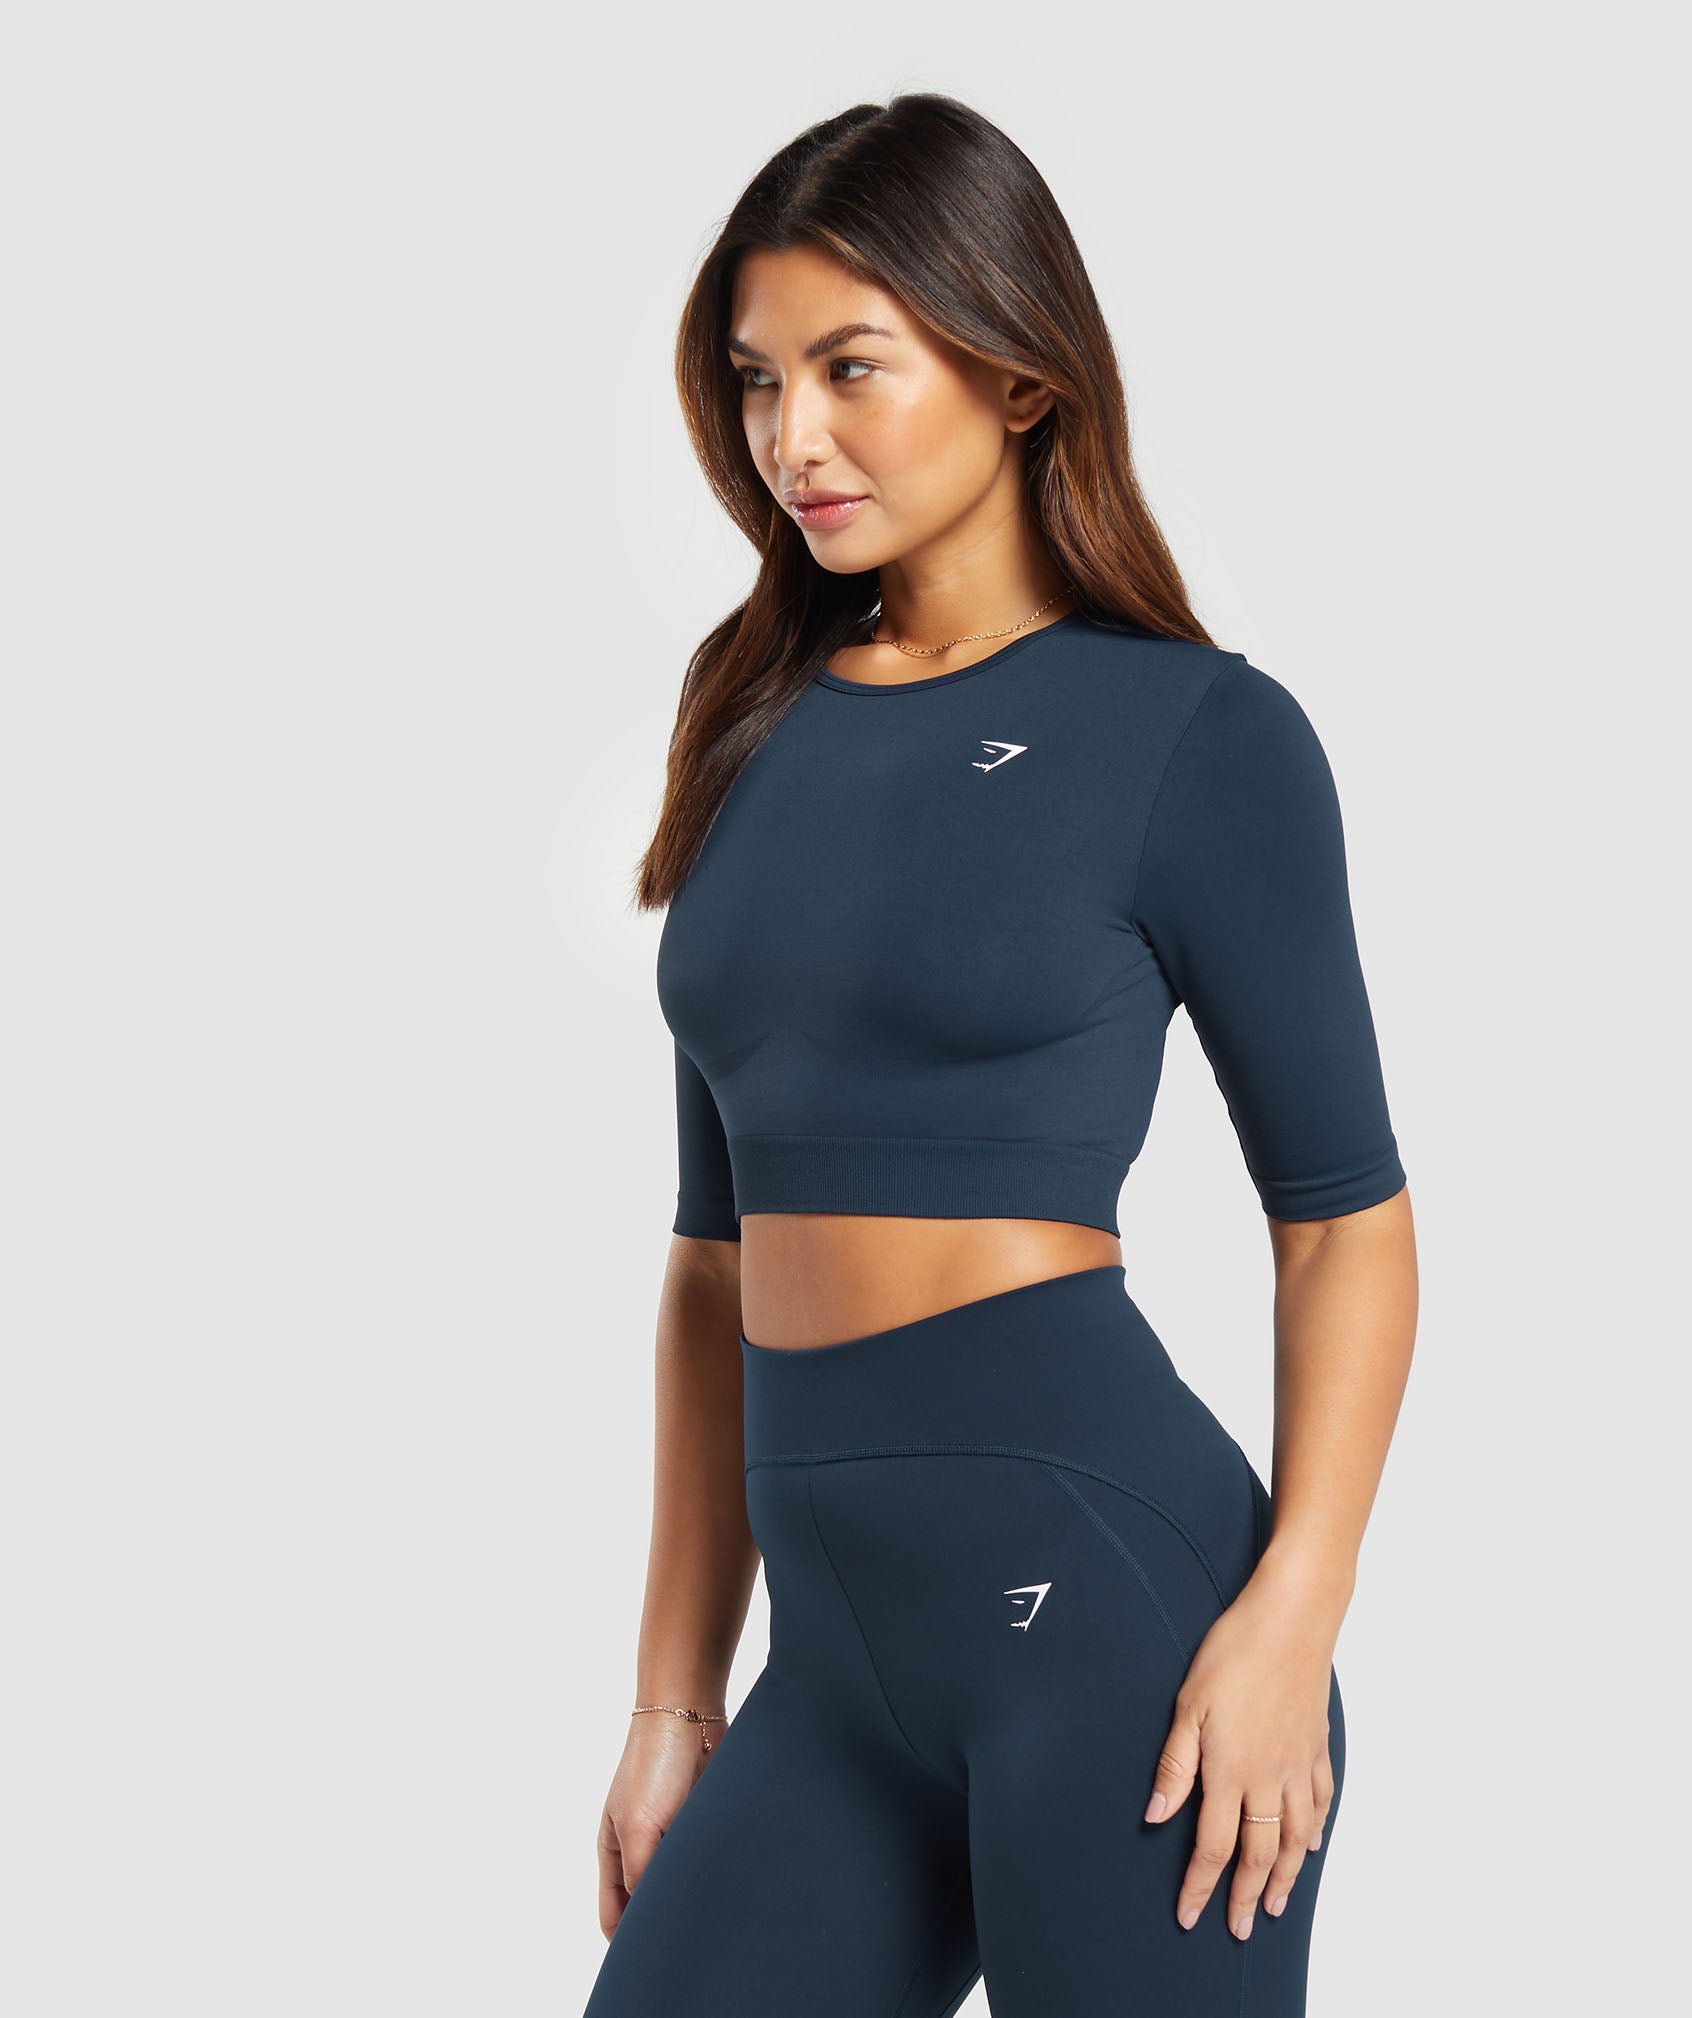 Everyday Seamless Crop Top in Navy - view 3